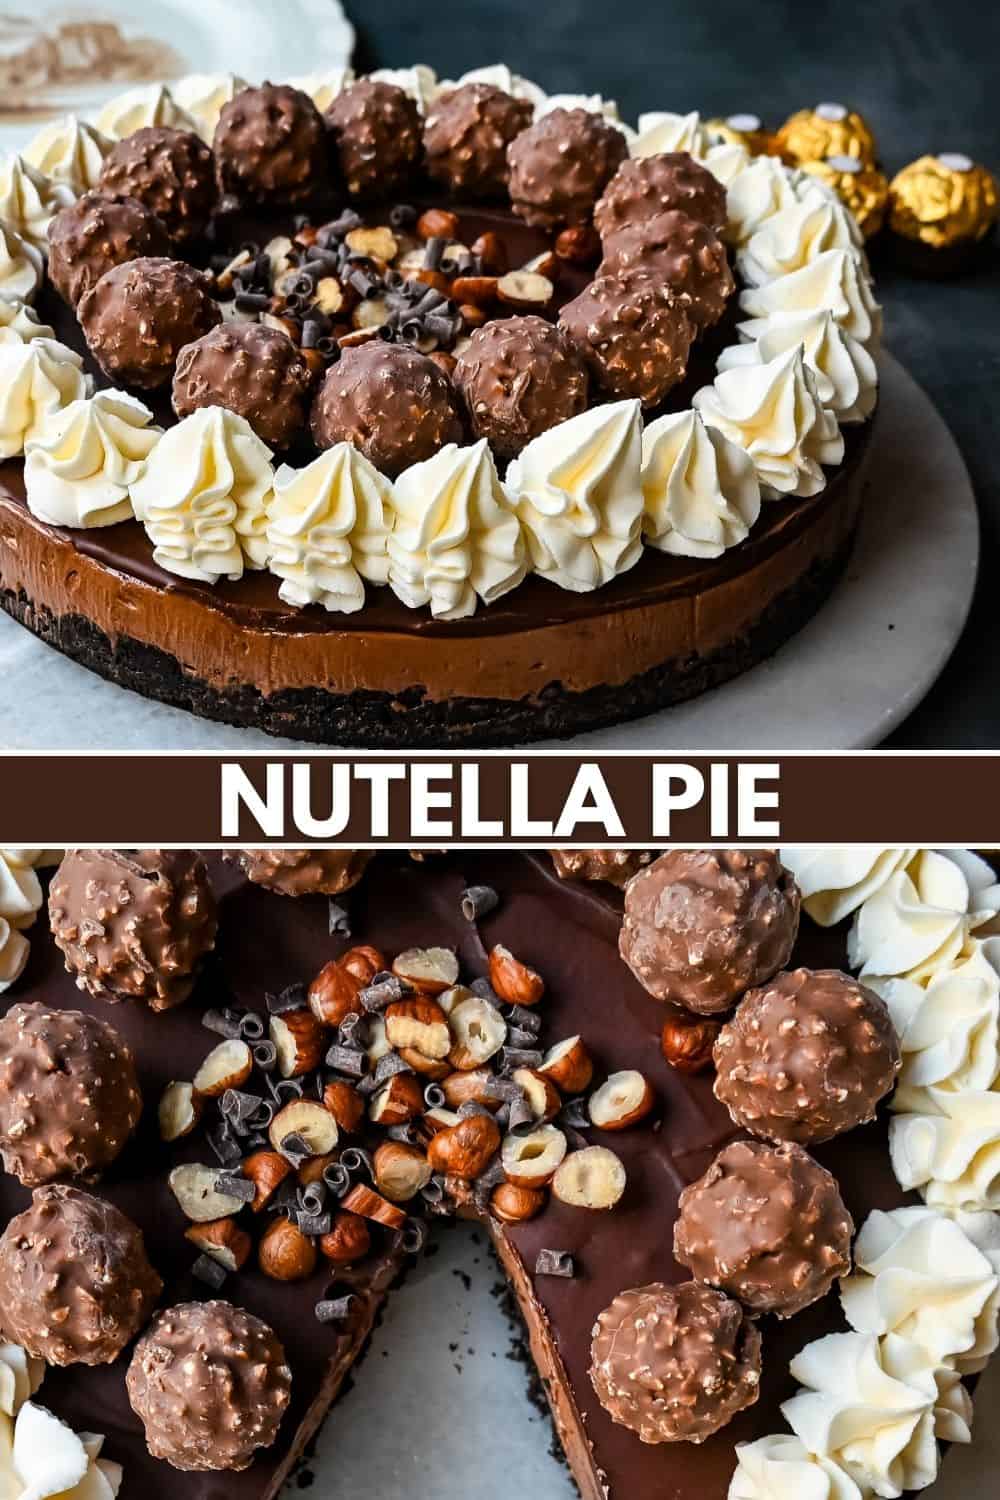 Easy No-Bake Chocolate Nutella Cream Pie with an Oreo cookie crust. This creamy Nutella pie is so decadent and delicious!